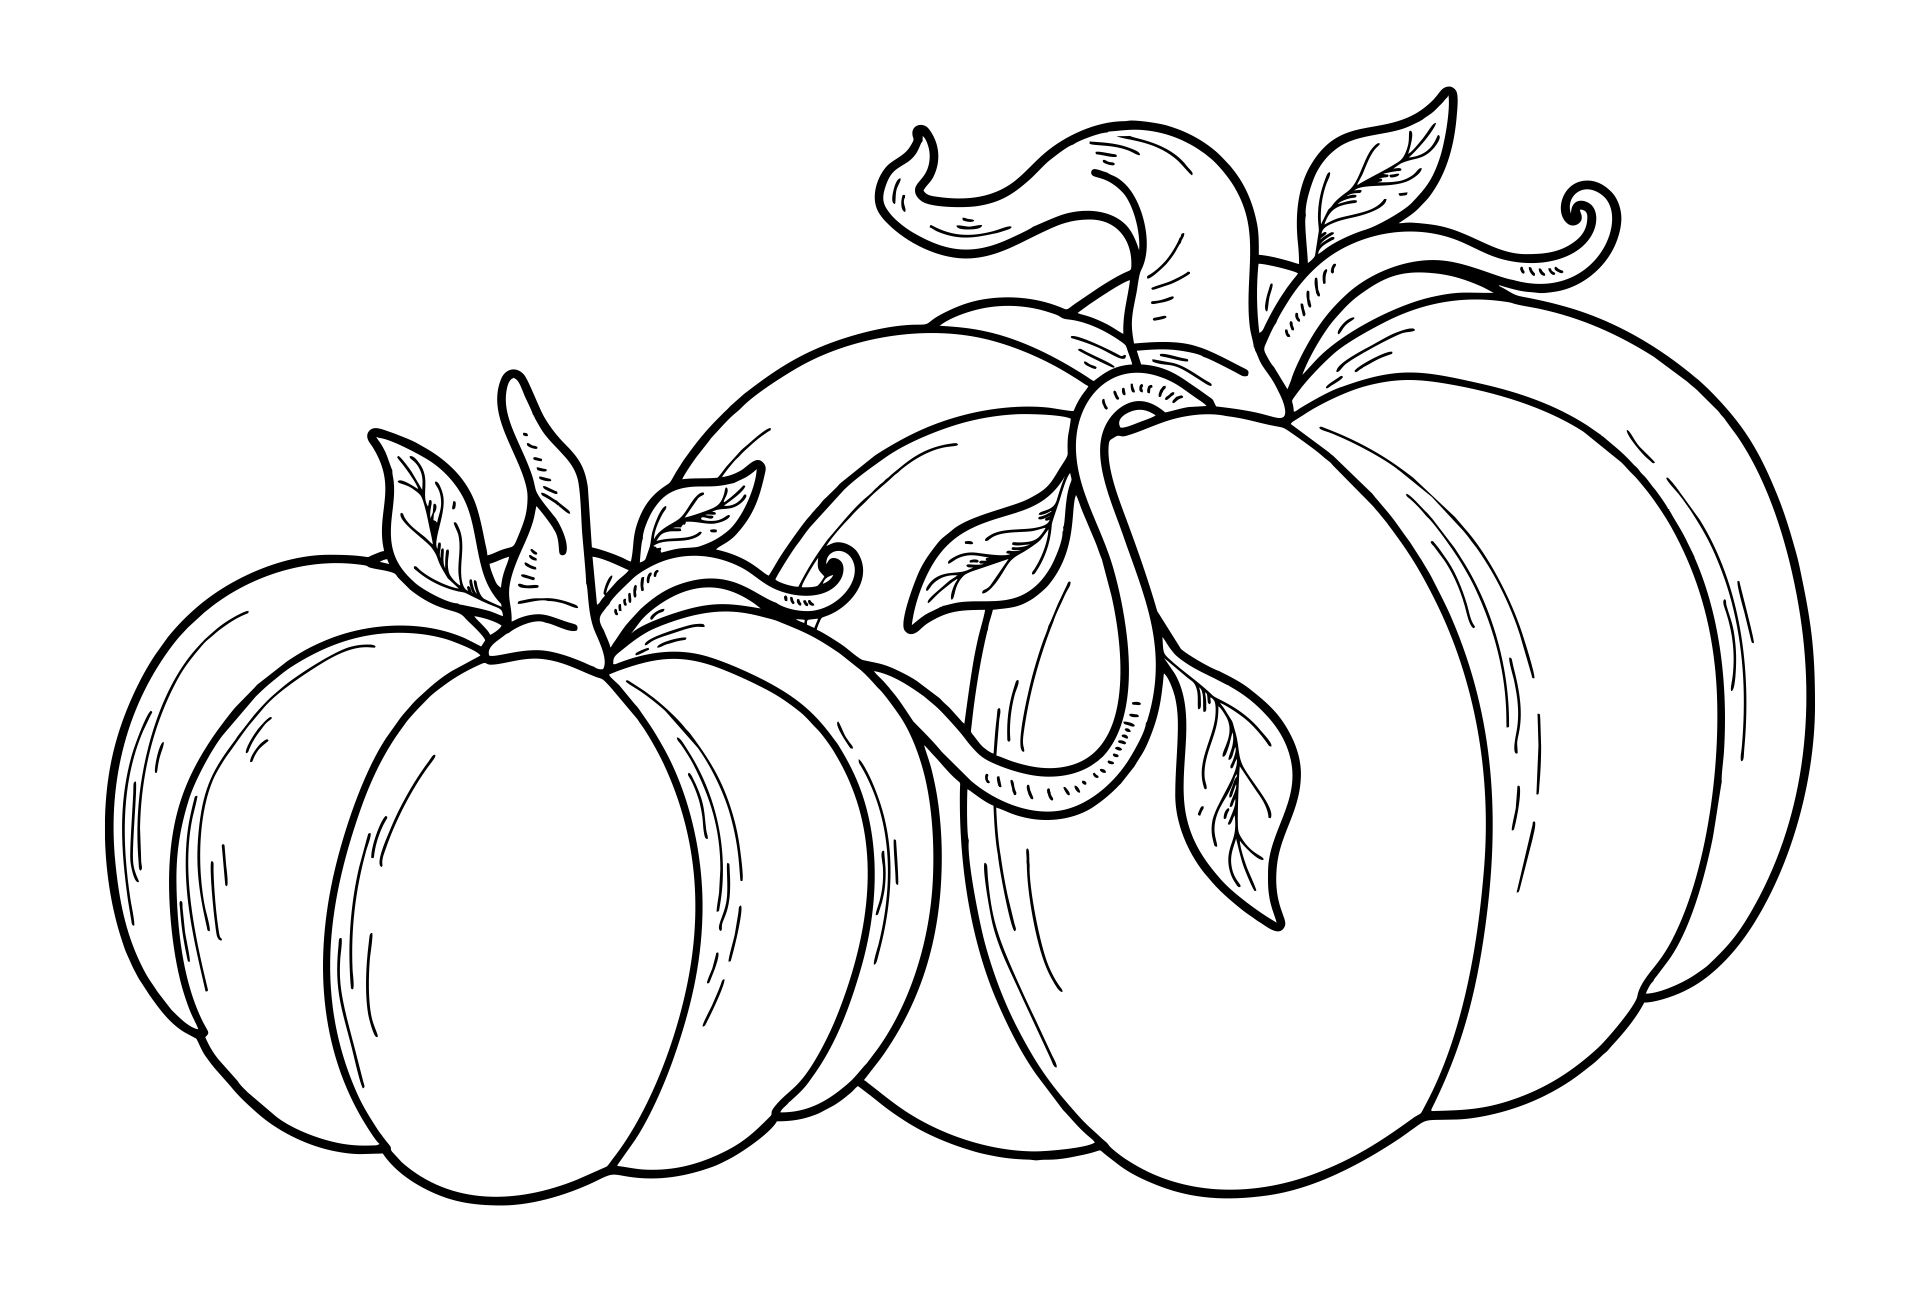 Pumpkin Coloring Pages Templates